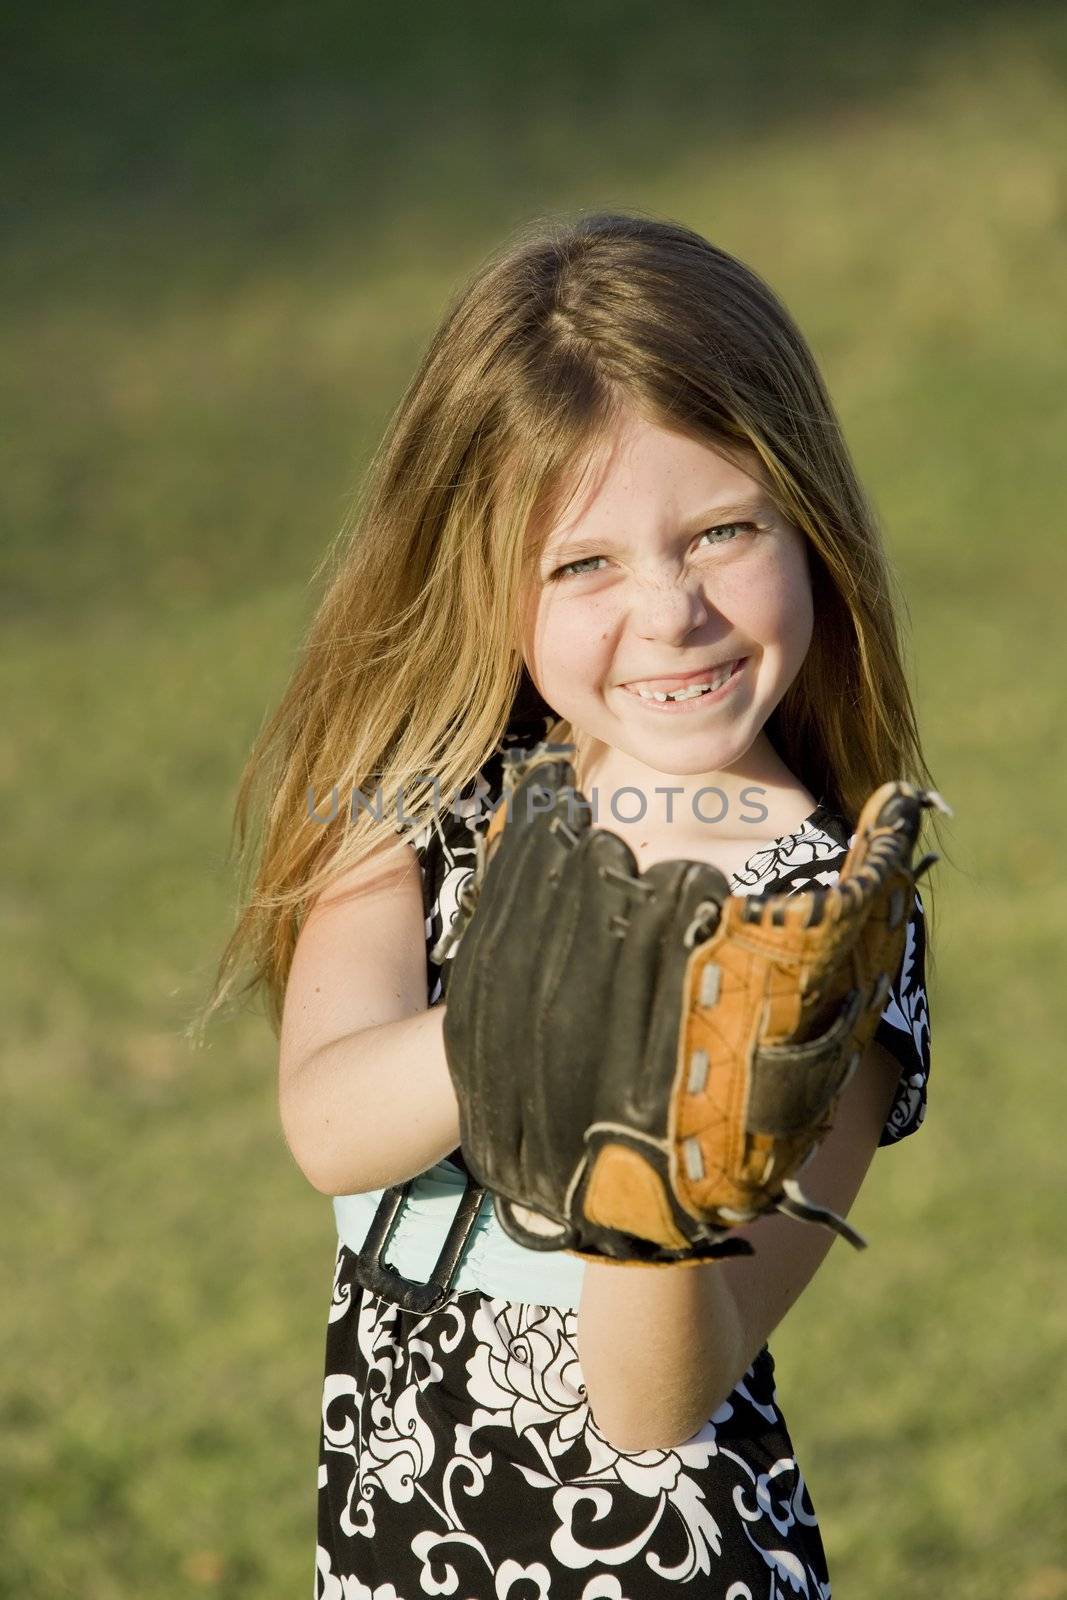 Cute young girl in summer dress with a baseball